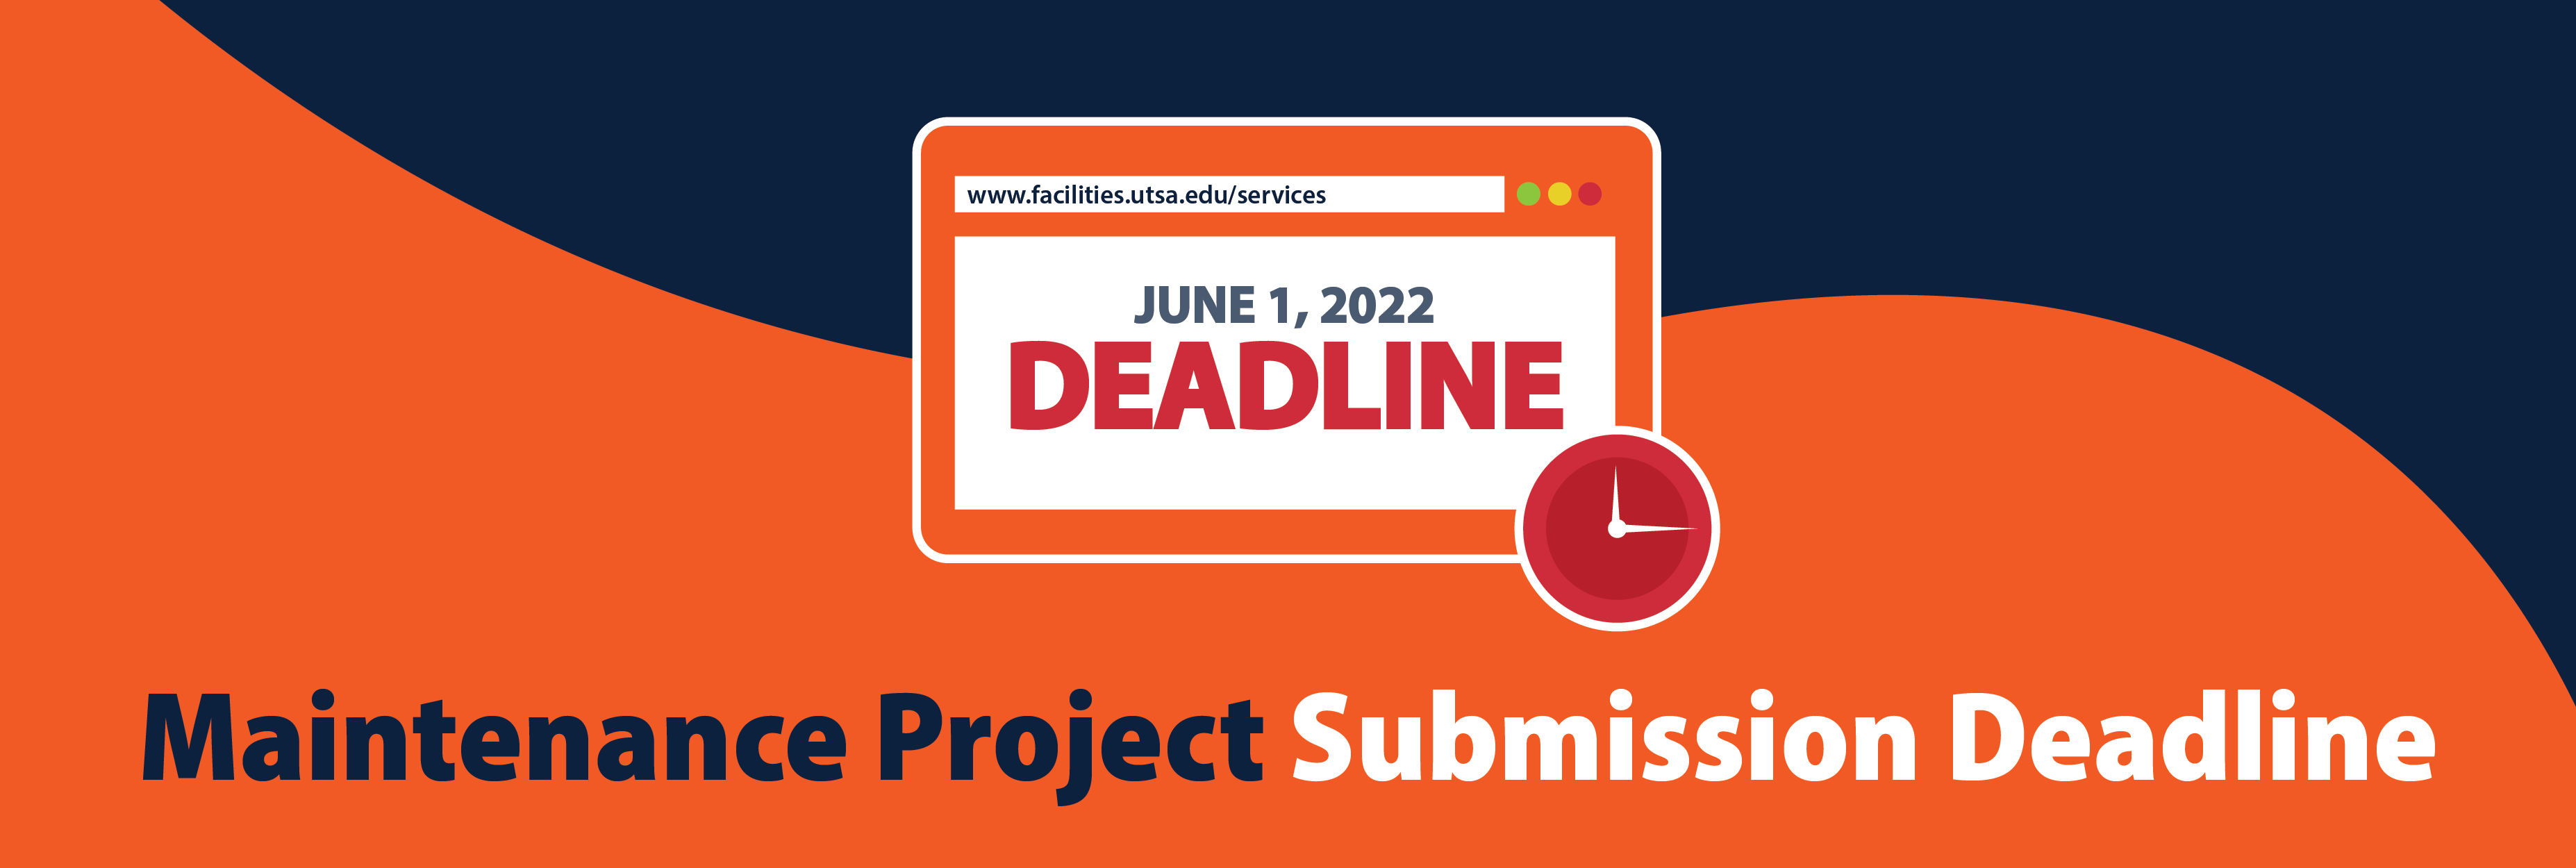 Fall 2022 Maintenane Project Submission Deadline